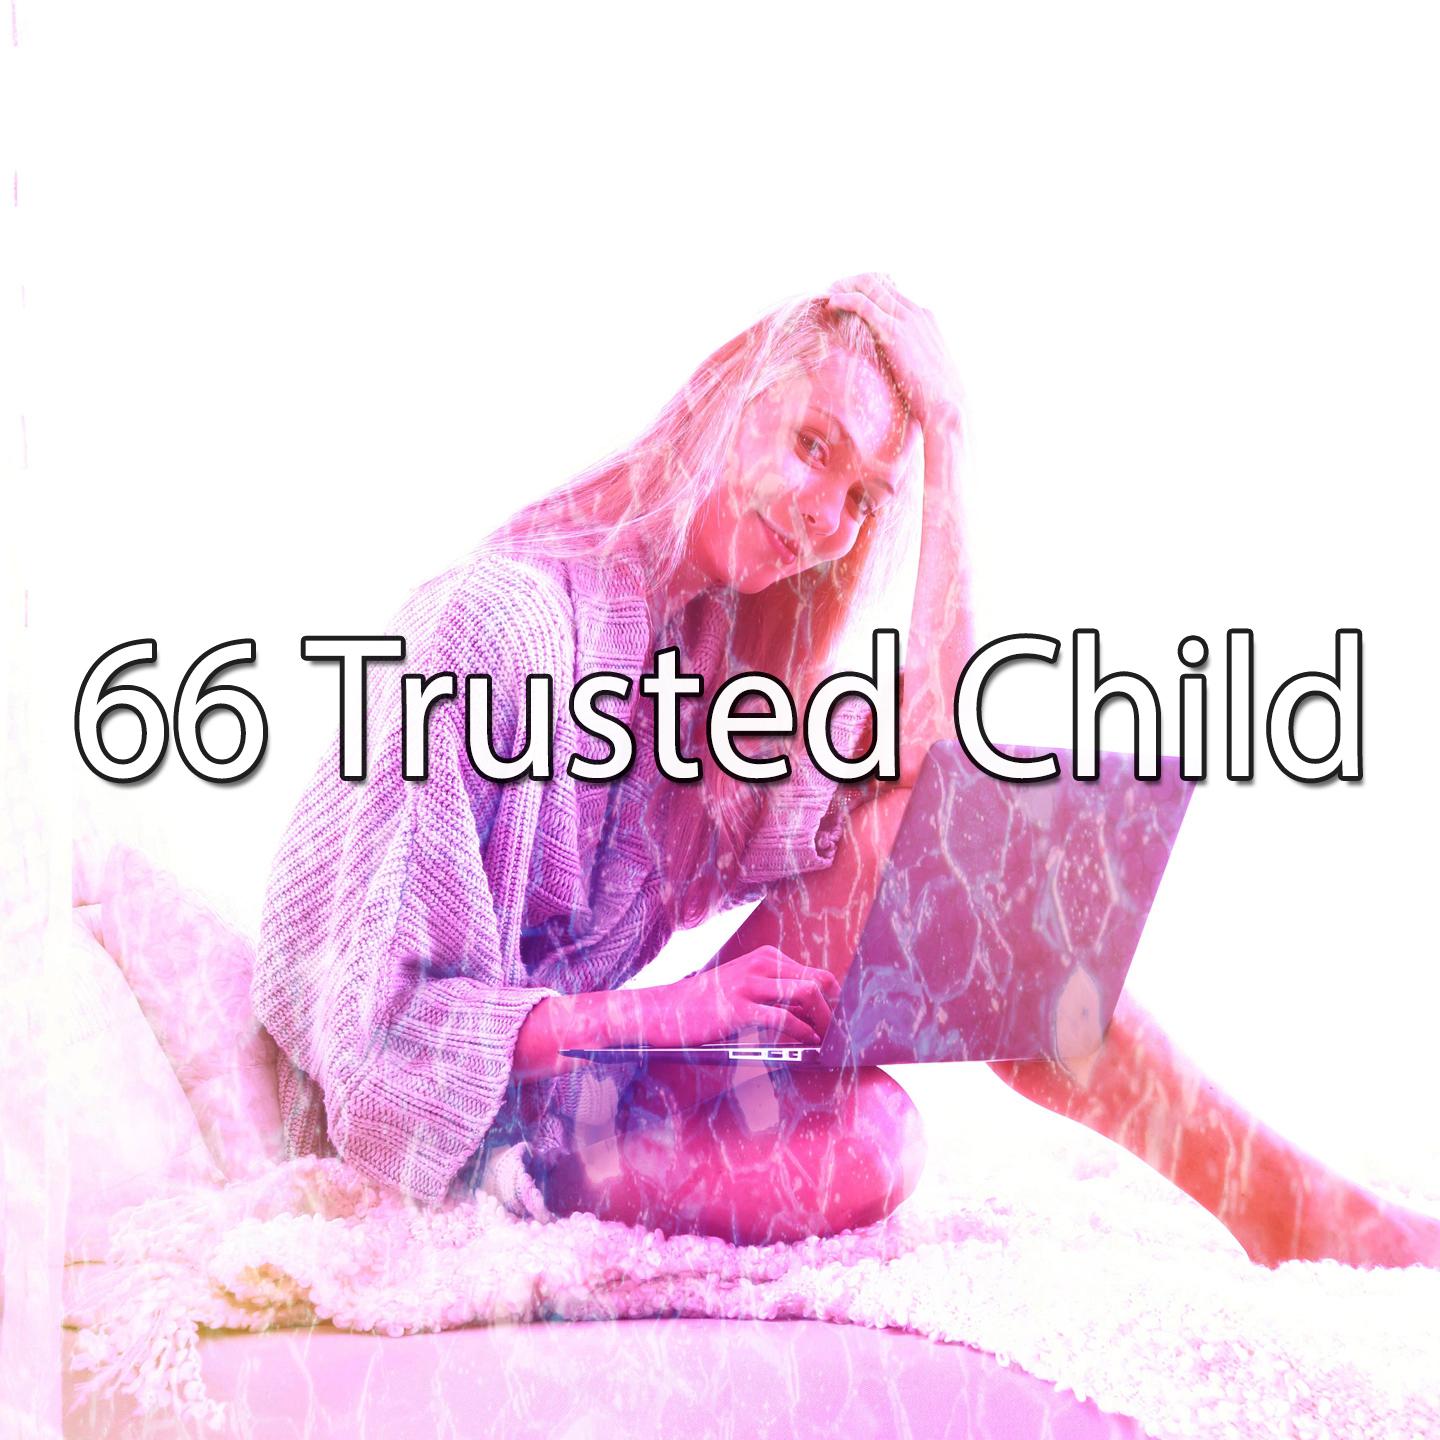 66 Trusted Child